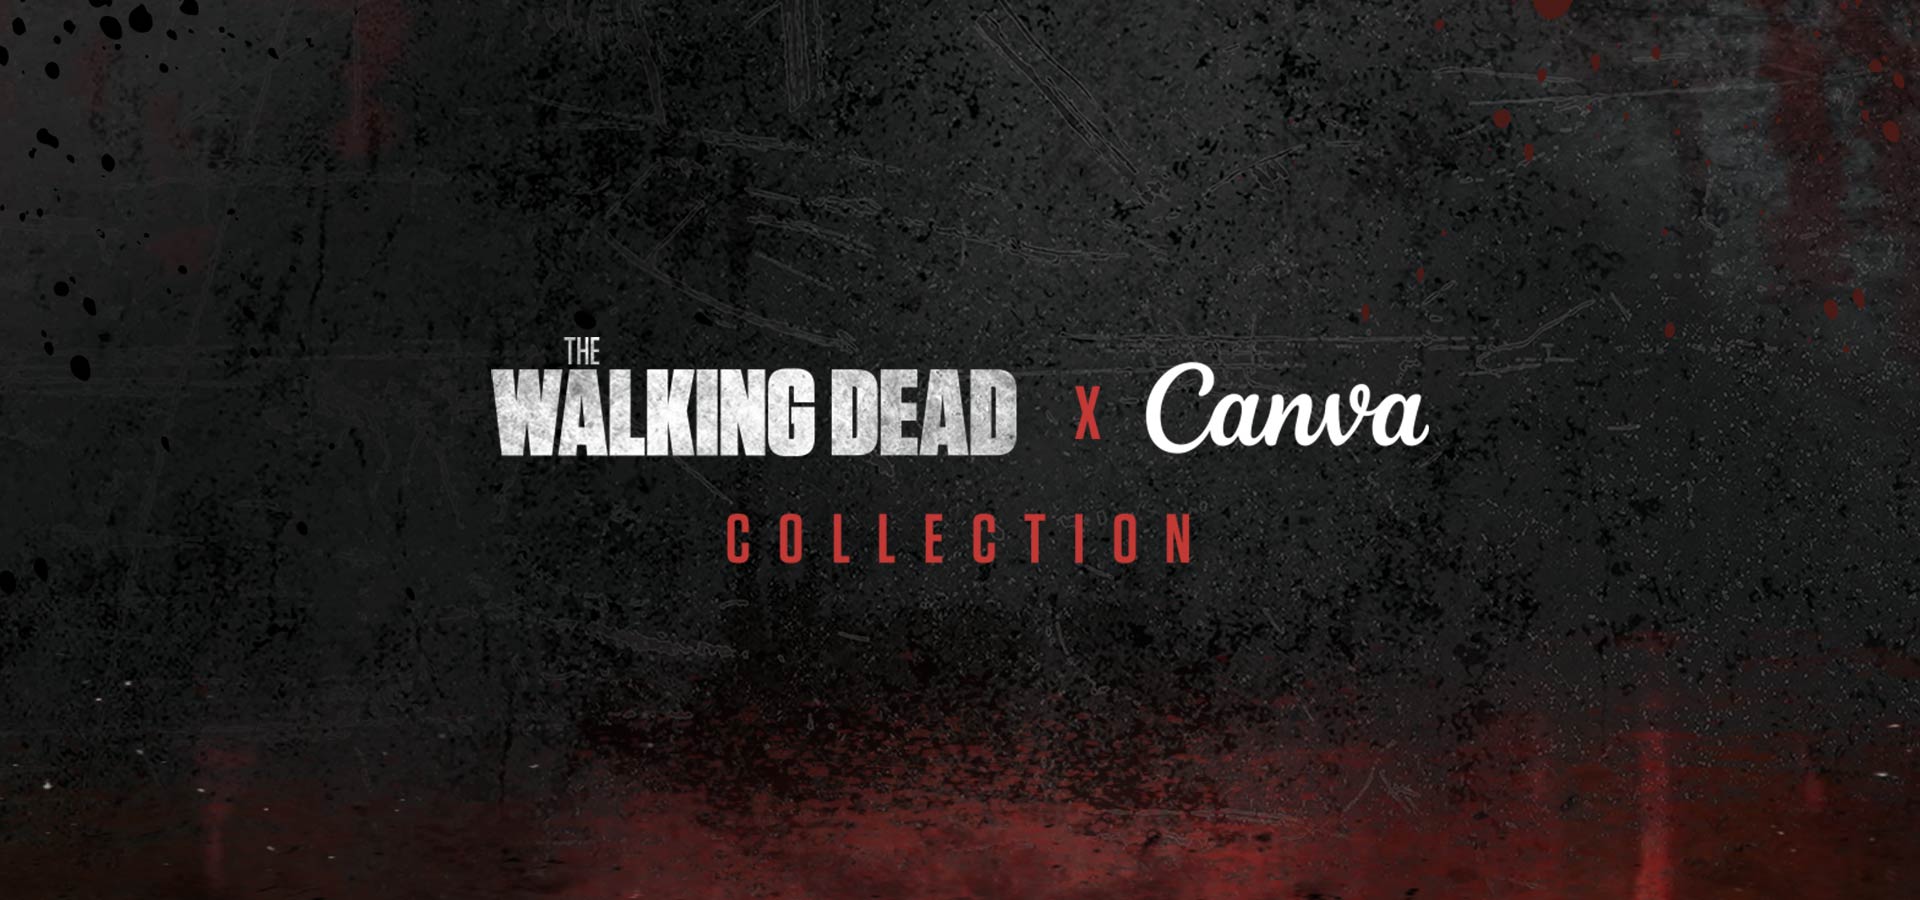 Celebrating the Final Season of The Walking Dead with Canva